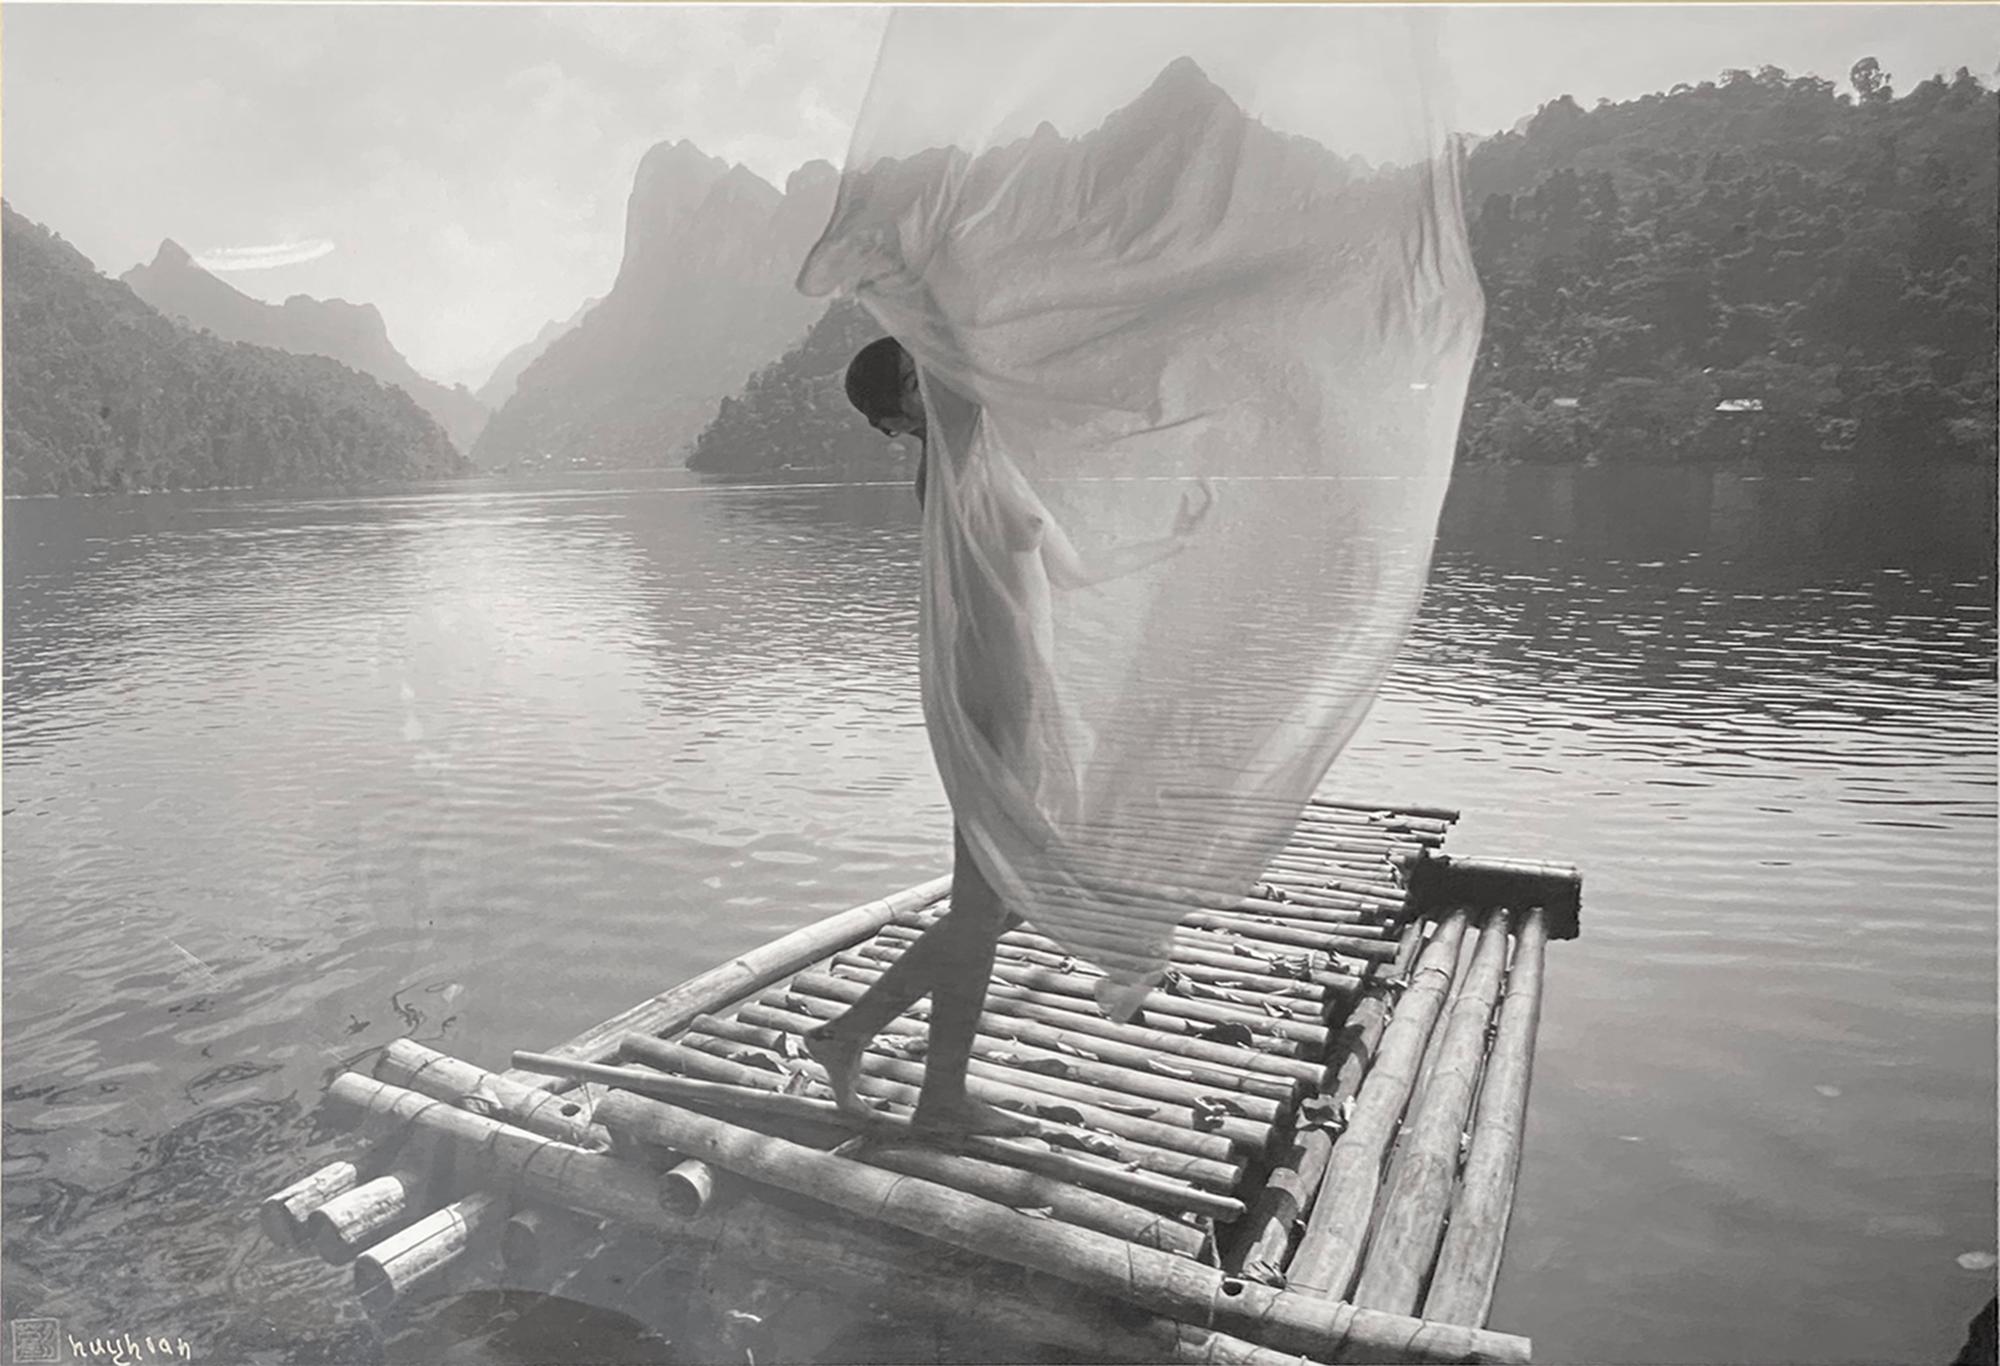 Tran Huy Hoan Nude Photograph - 'Lady on Raft', Framed Black & White Photograph, Female Figure